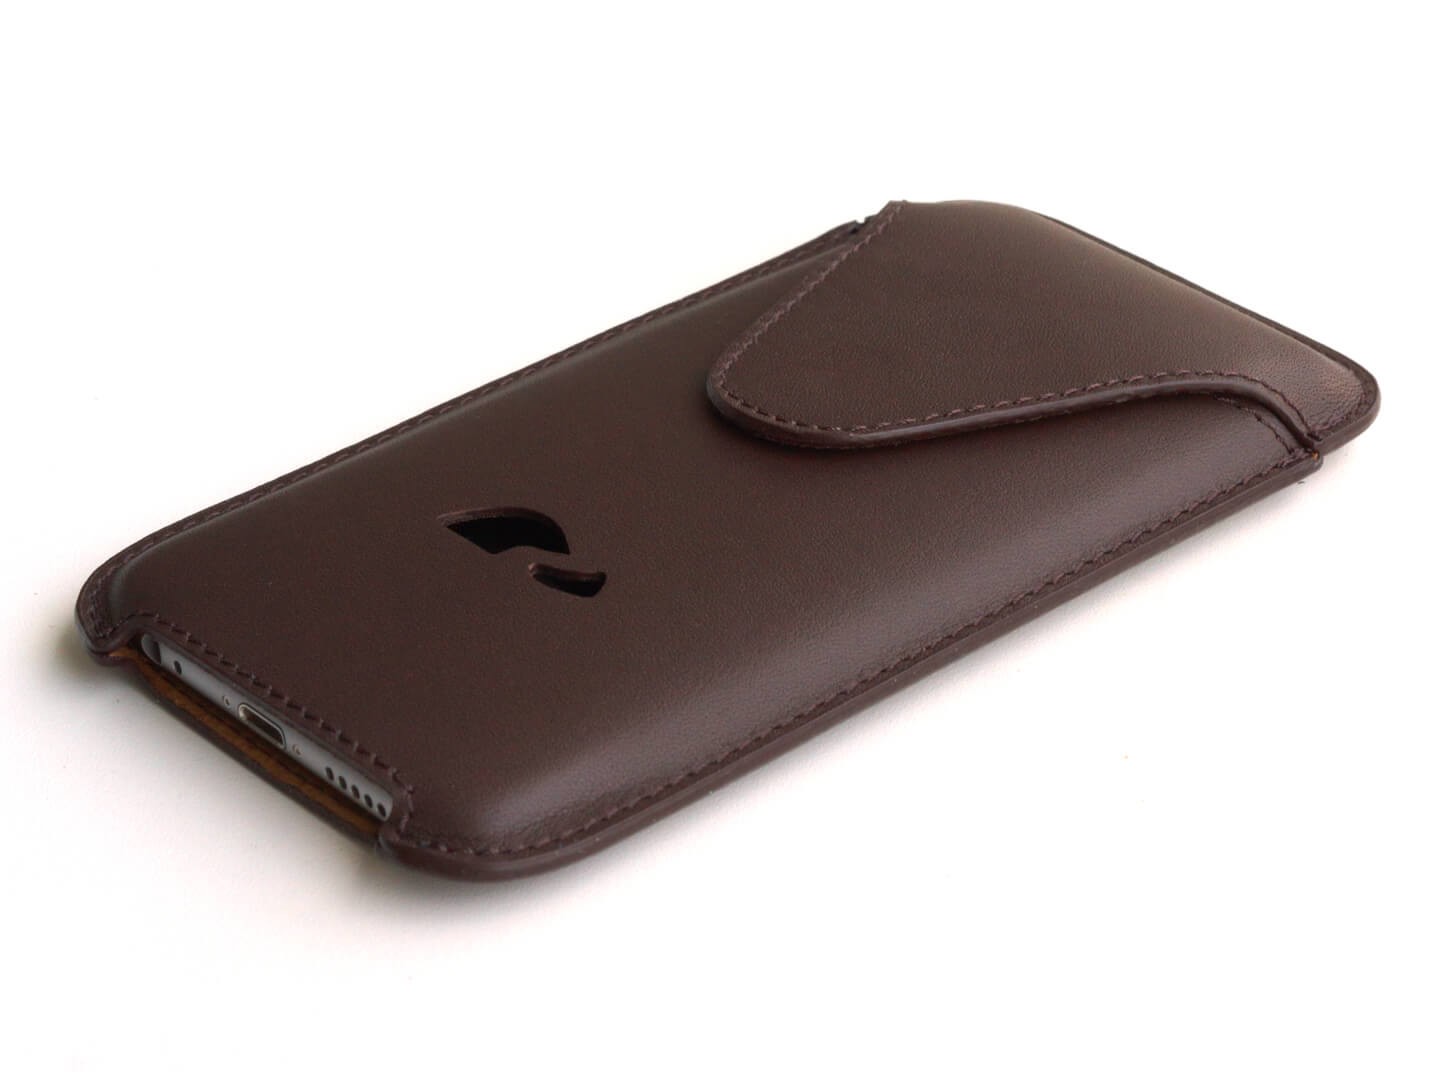 Leather Sleeve iPhone 6 / 7 / 8 Plus Slim case - brown - Carapaz